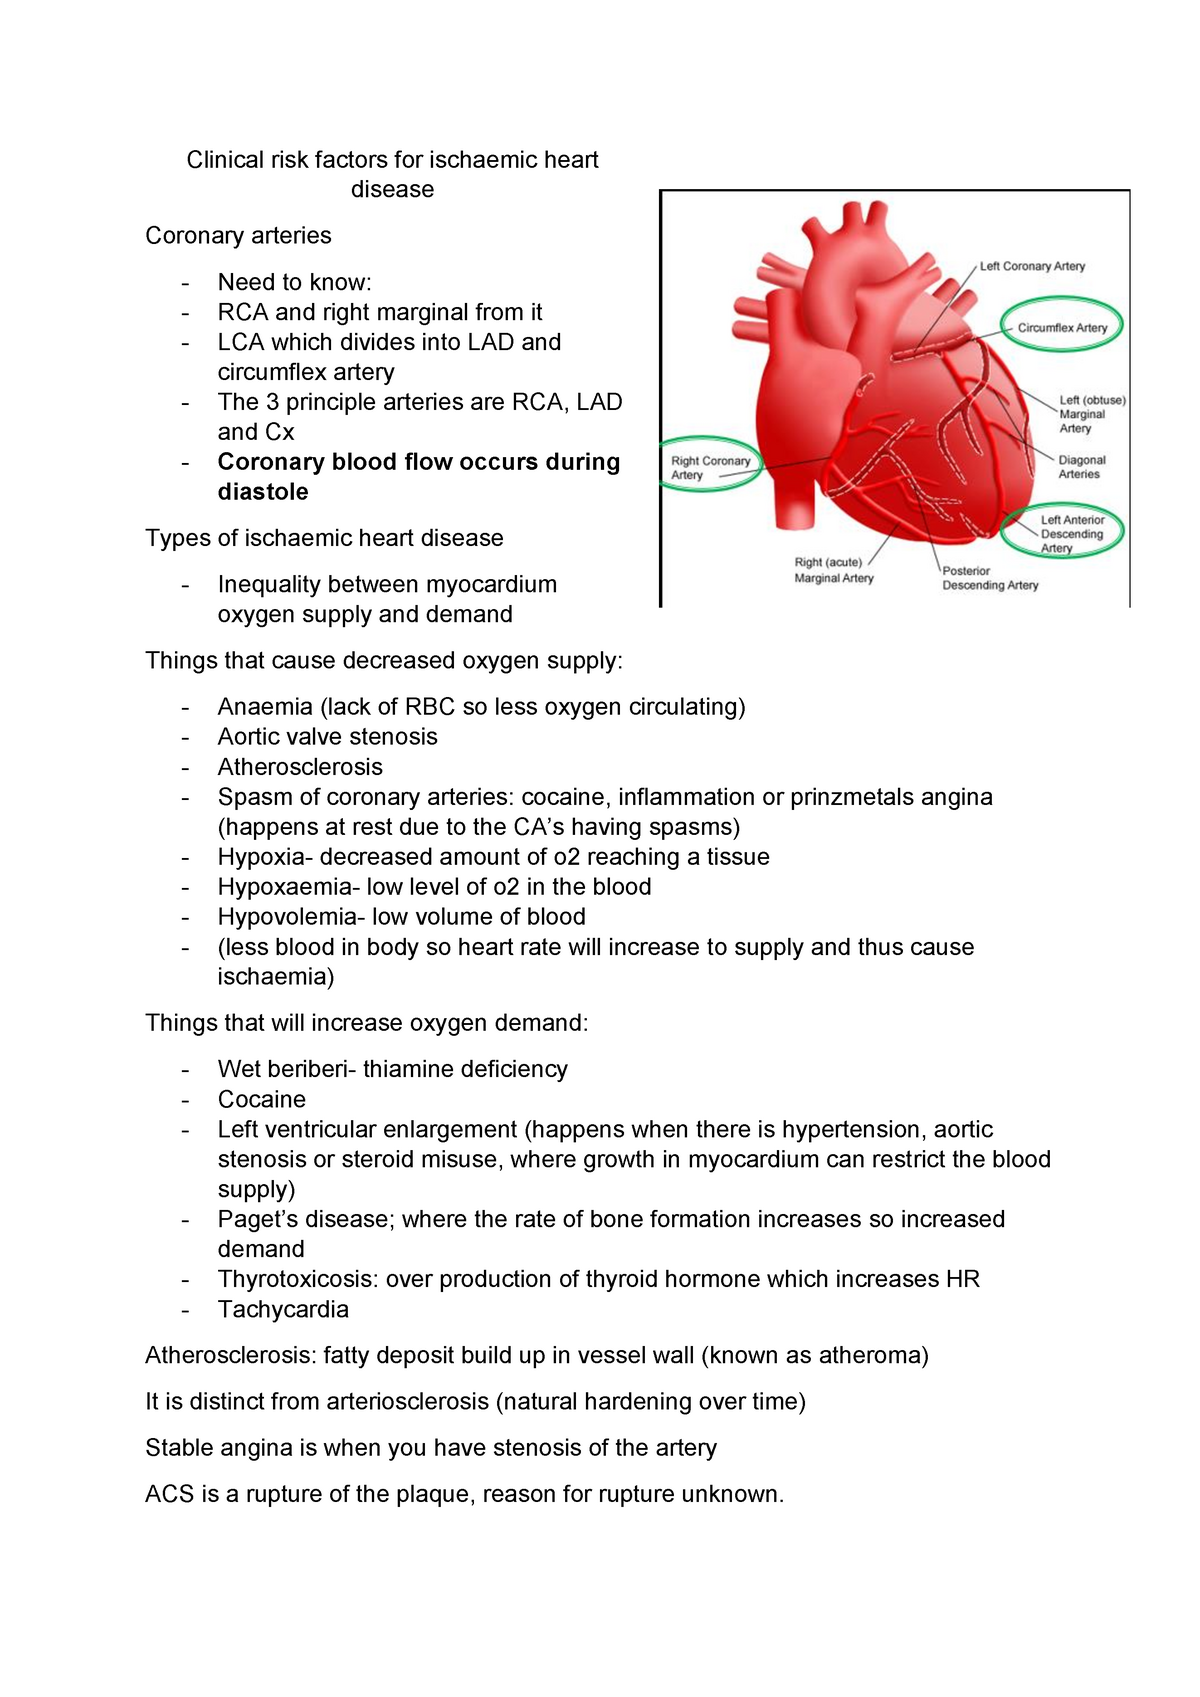 Clinical Risk Factors For Ischaemic Heart Disease Clinical Risk Factors For Ischaemic Heart 4379